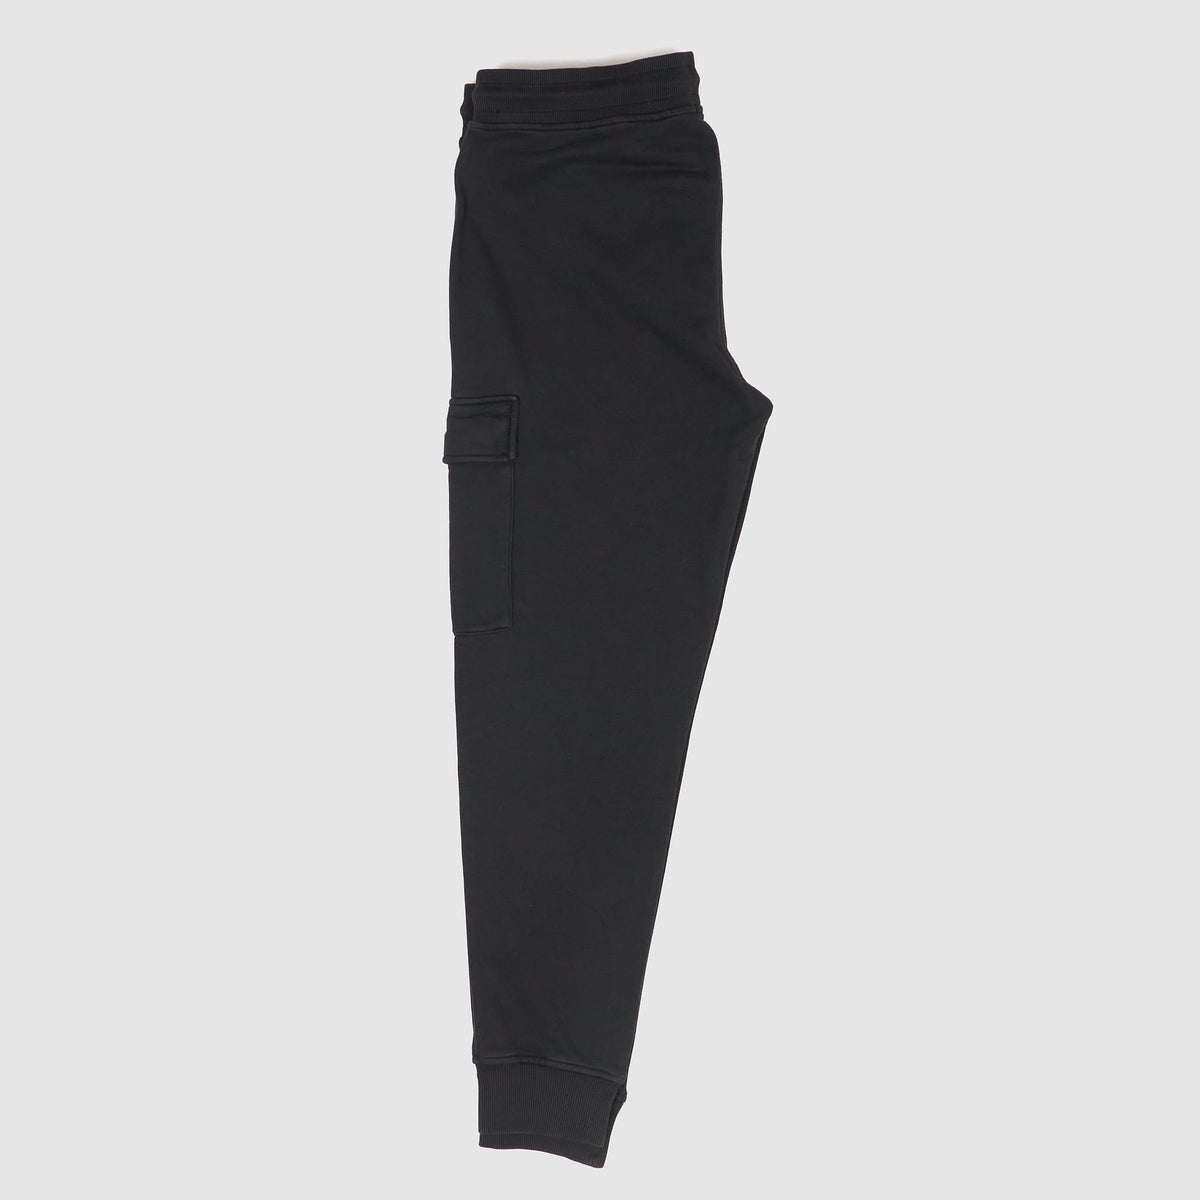 C.P. Company Easy Fitted Cargo Sweatpants